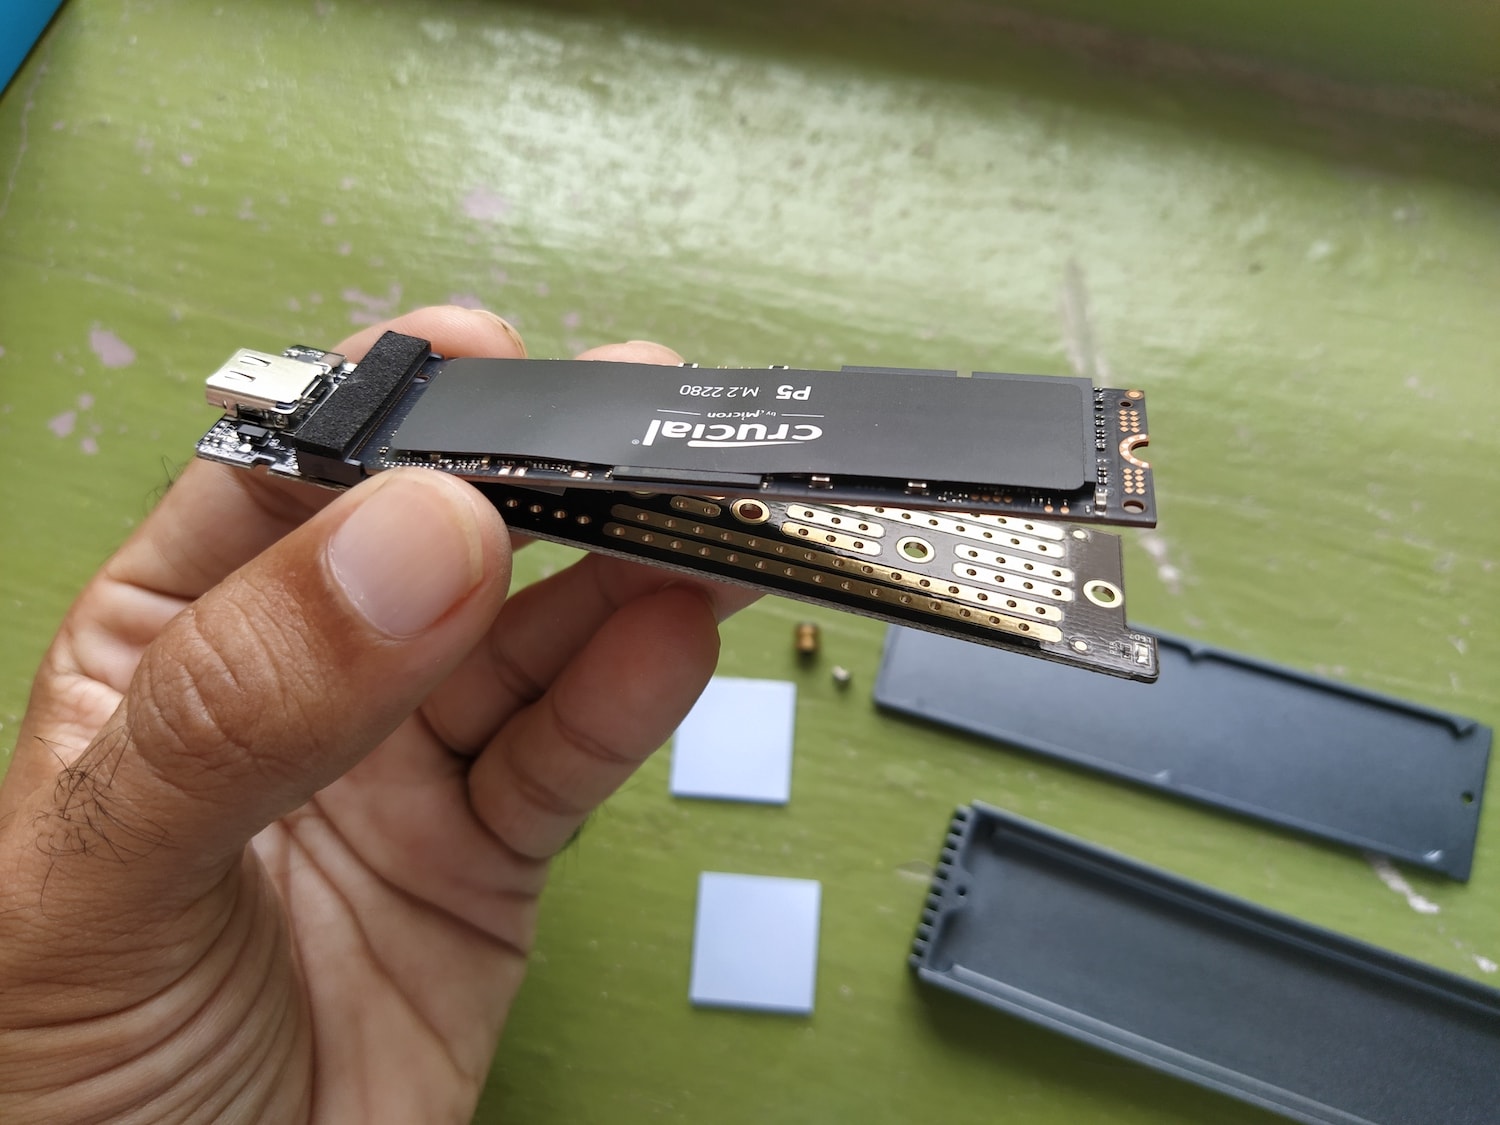 Attaching SSD to enclosure